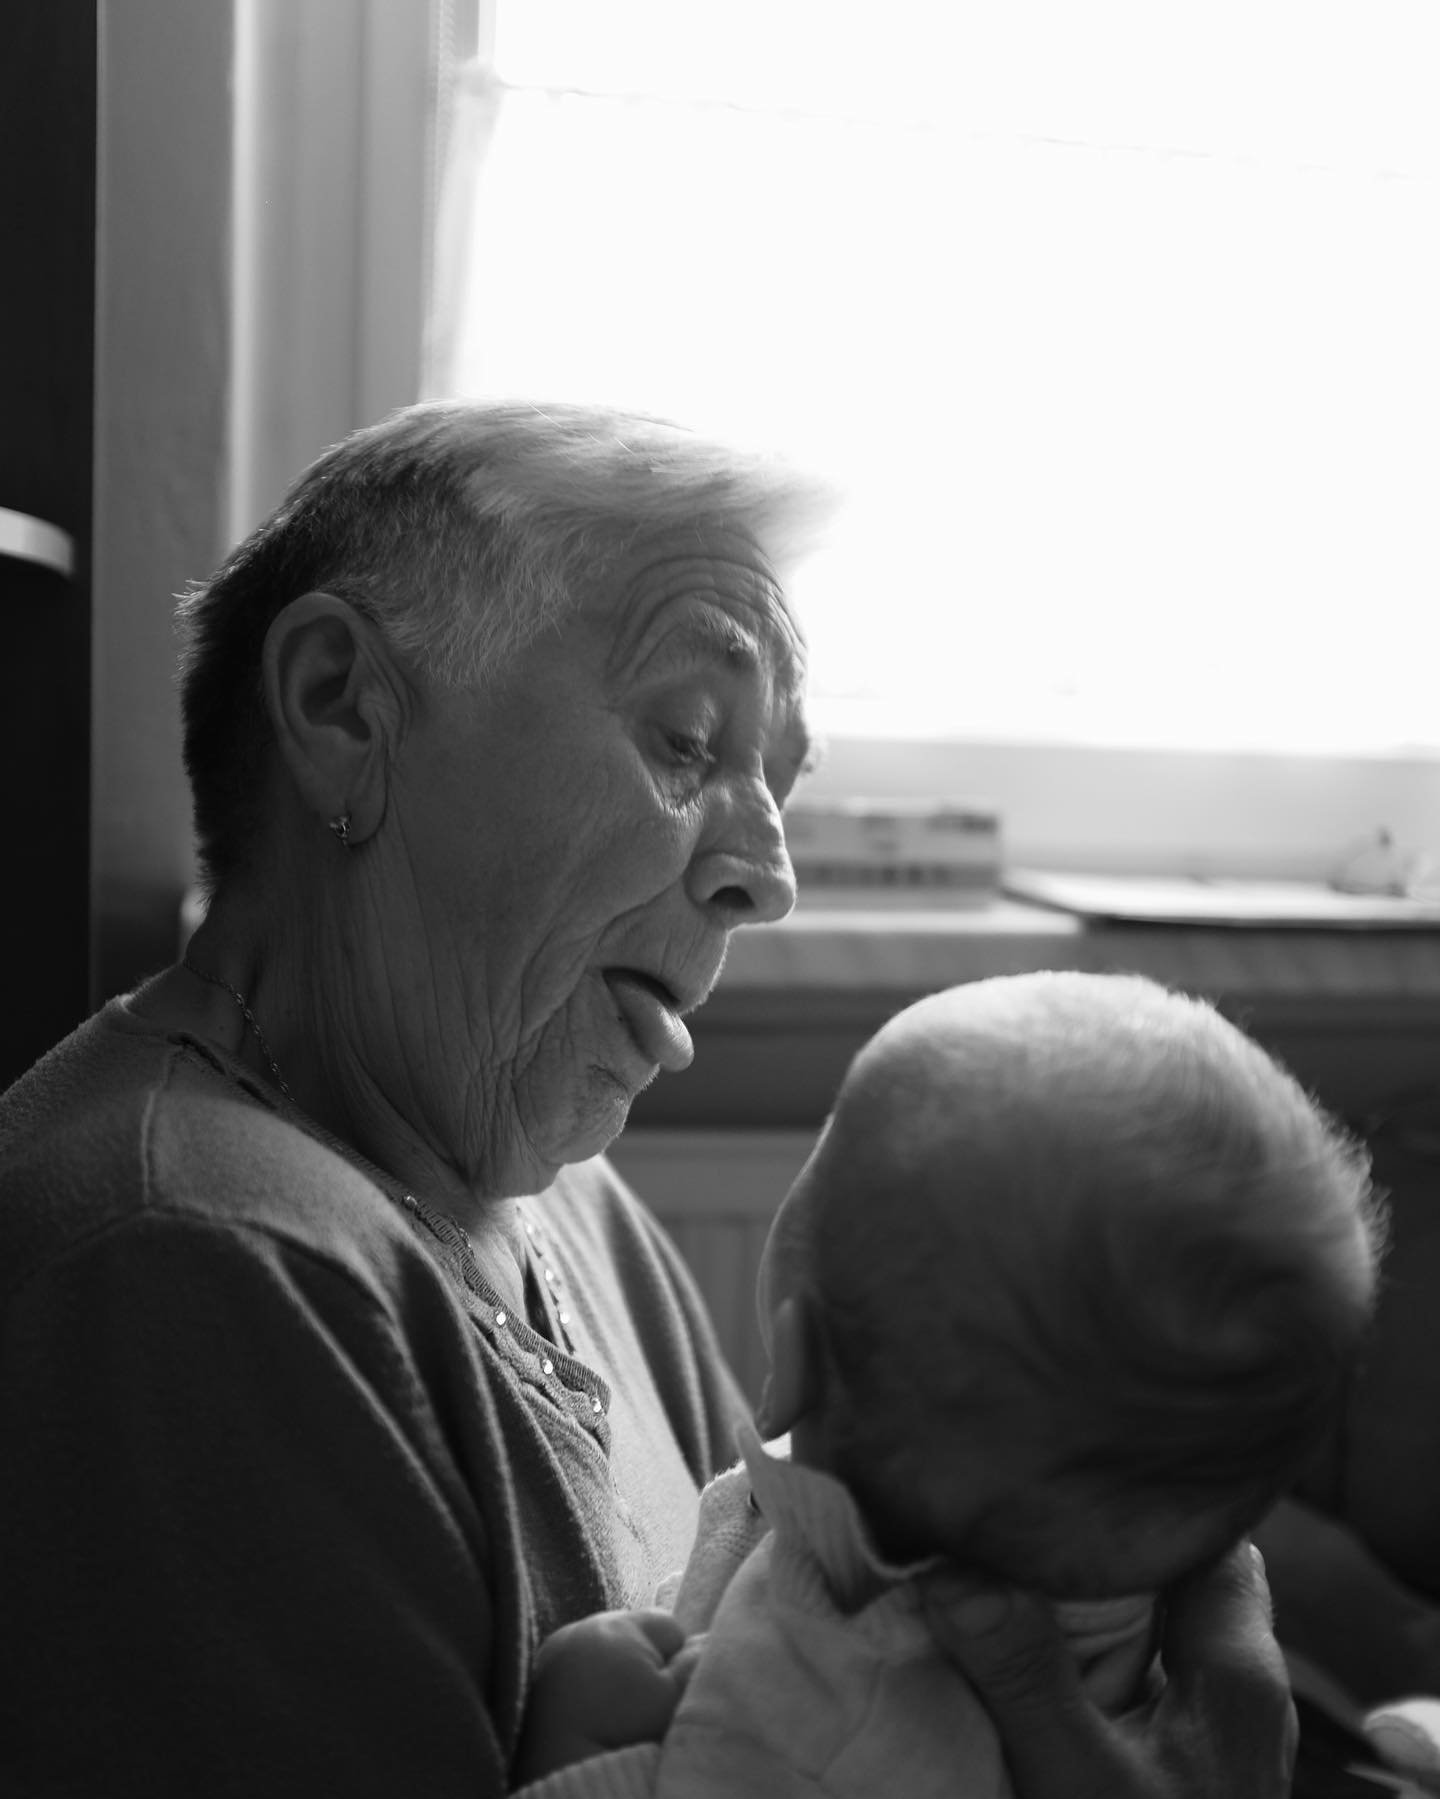 I love this photo of my son and his late great grandmother taken when he was only a few months old. Only just over 80 years difference between them ❤️ #makeiticonicEU @nikoneurope 

📷 Fujifilm x100s